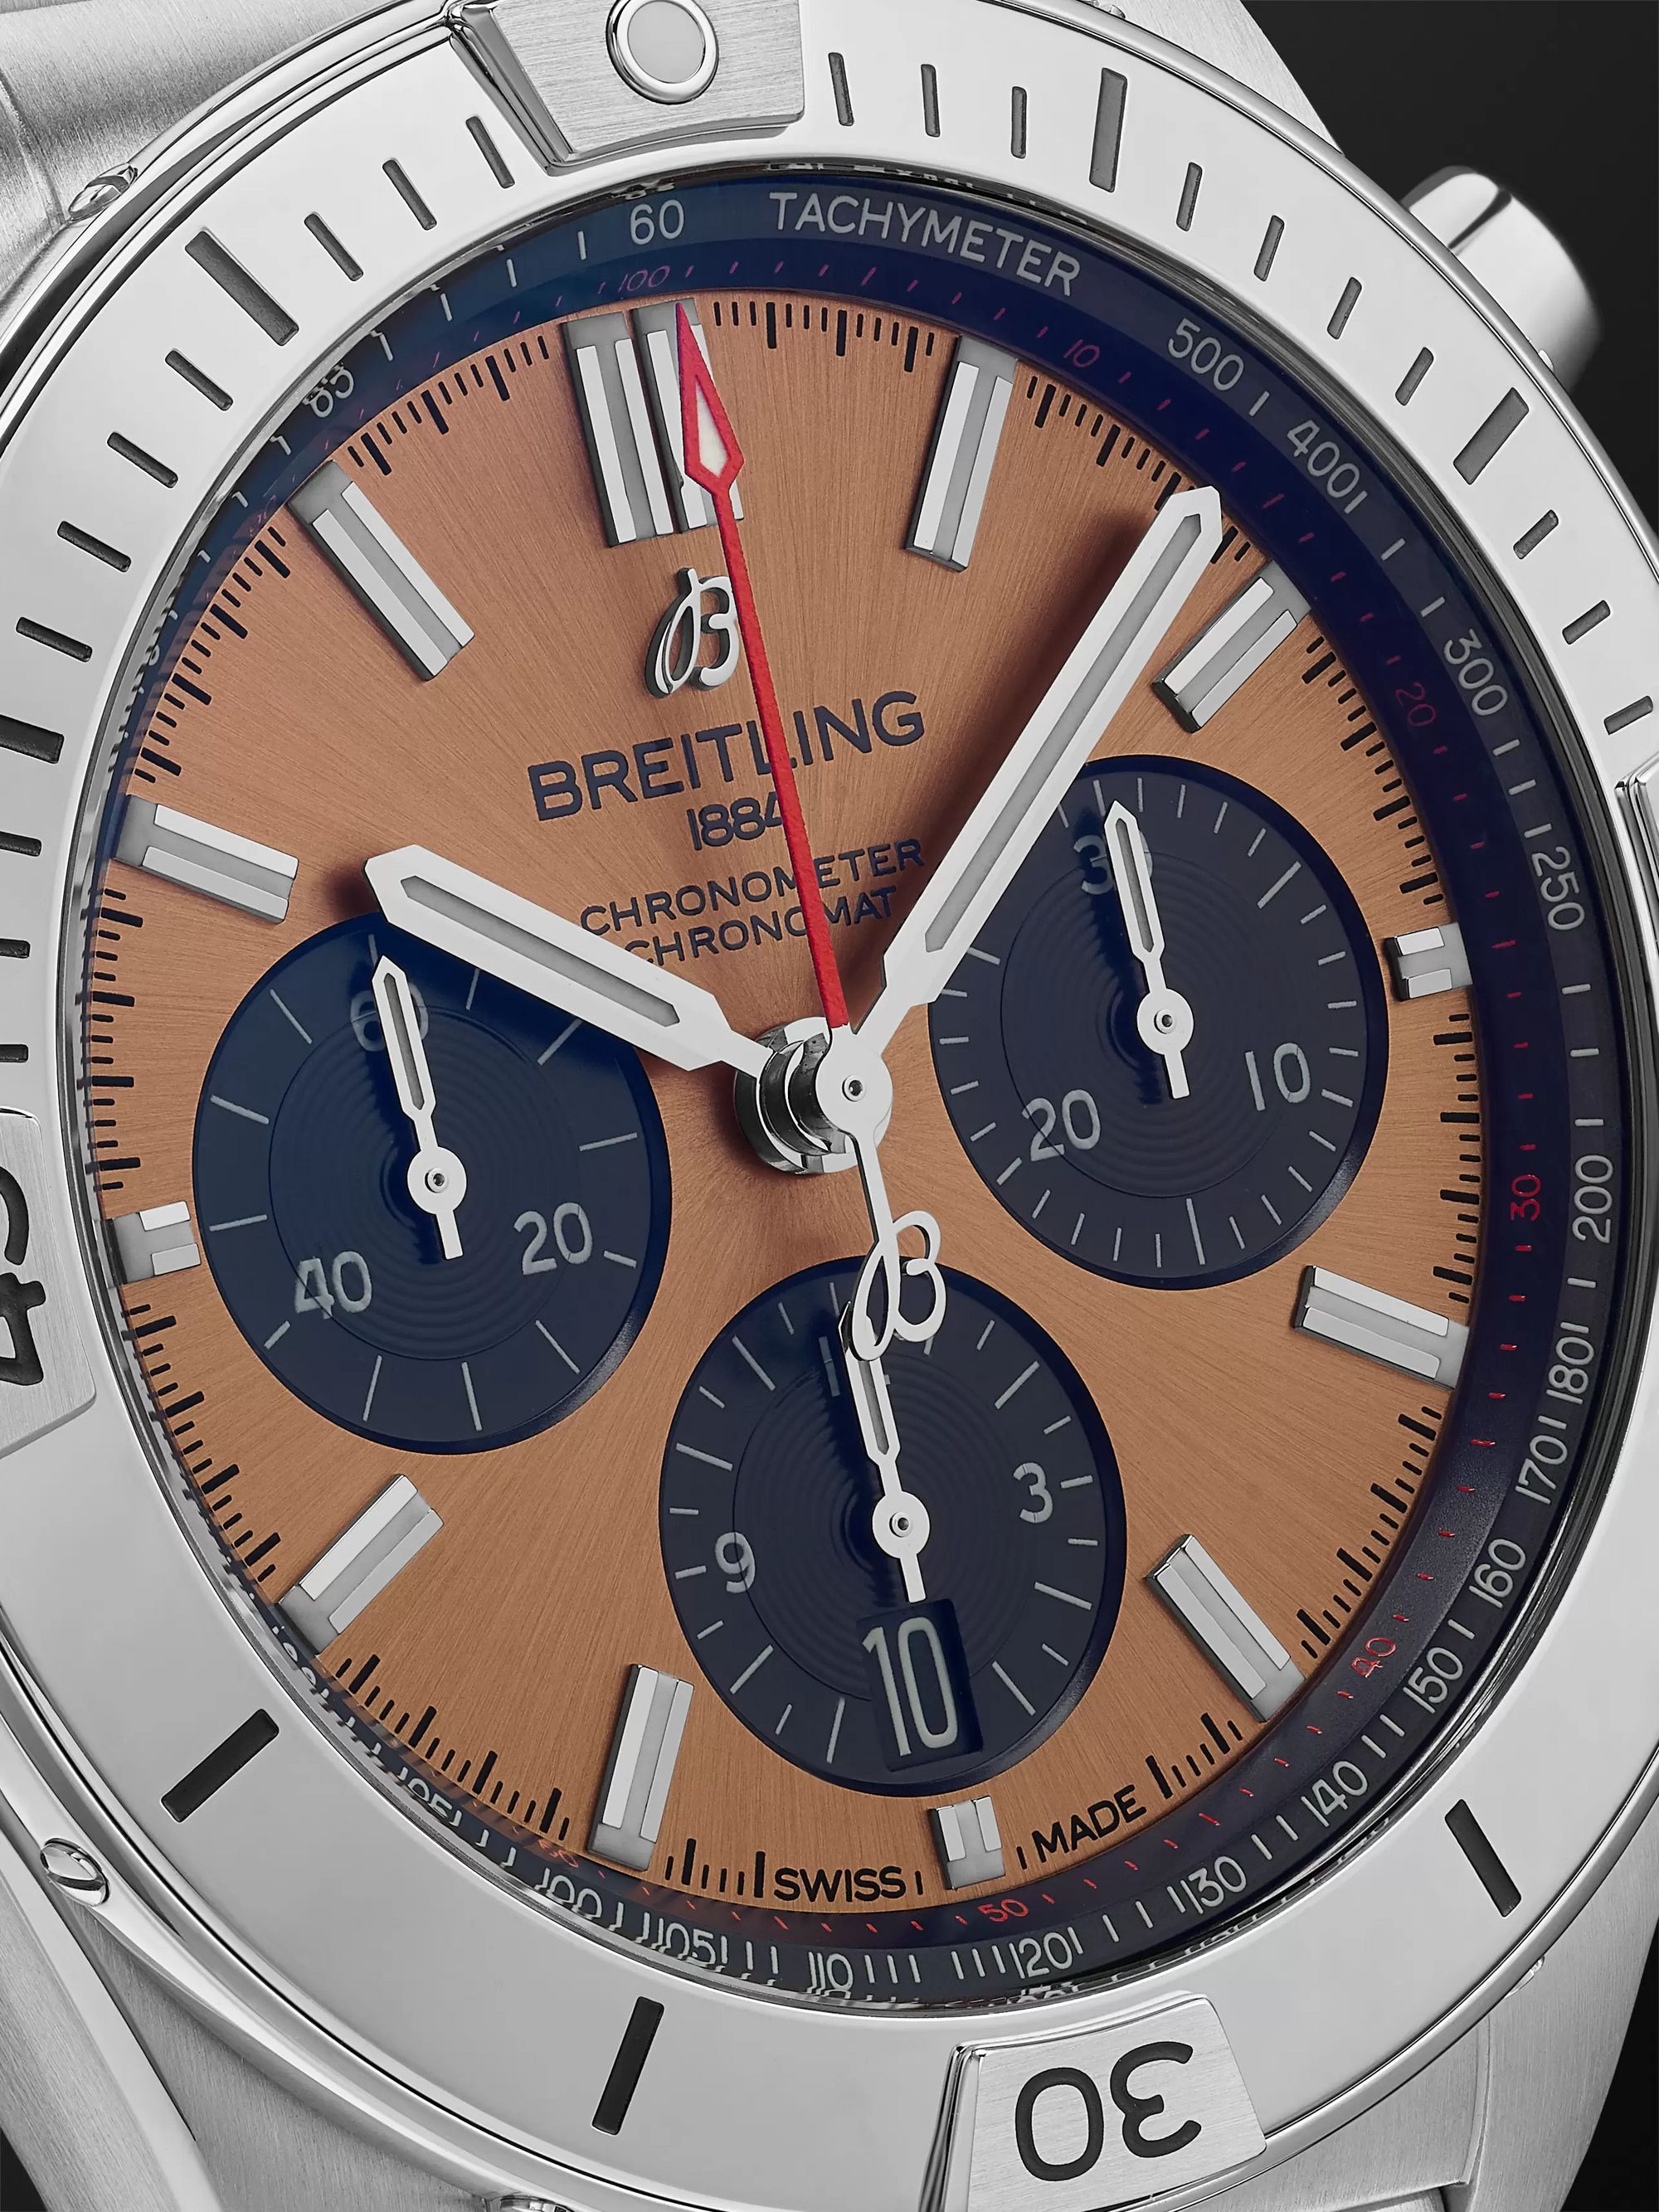 BREITLING Chronomat B01 Automatic Chronograph 42mm Stainless Steel Watch, Ref. No. AB0134101K1A1